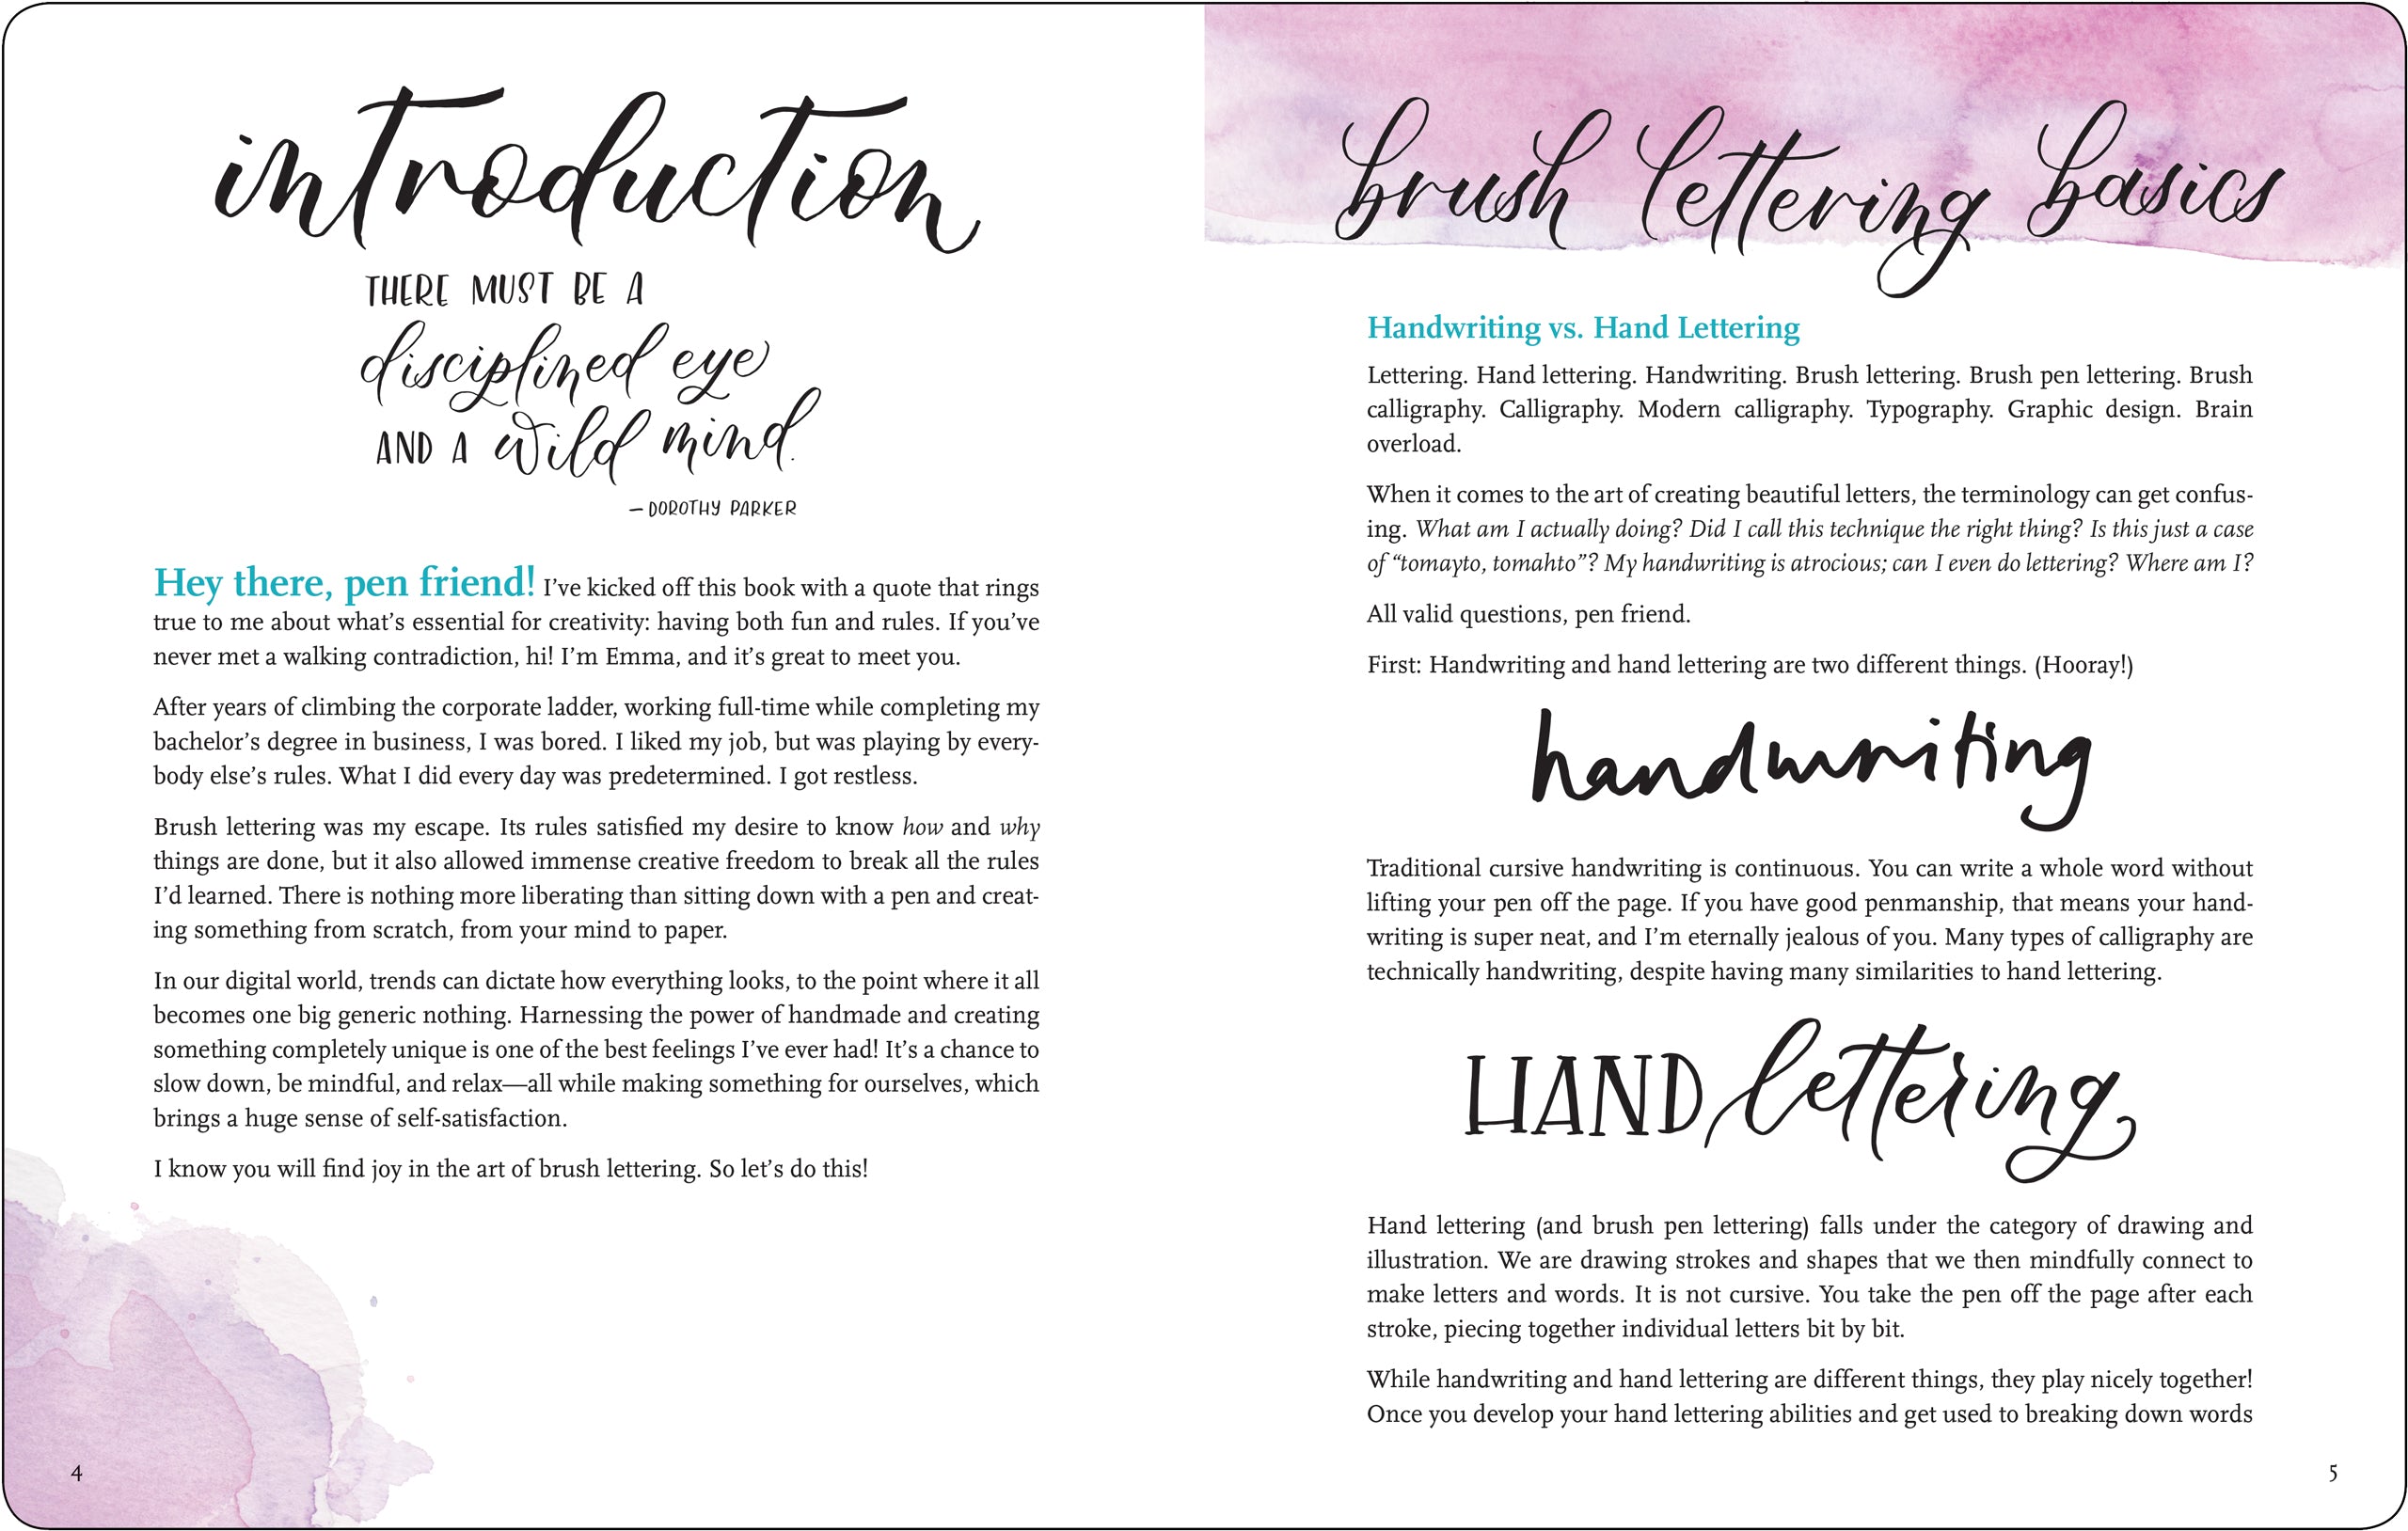 The Ultimate Guide to Modern Calligraphy & Hand Lettering for